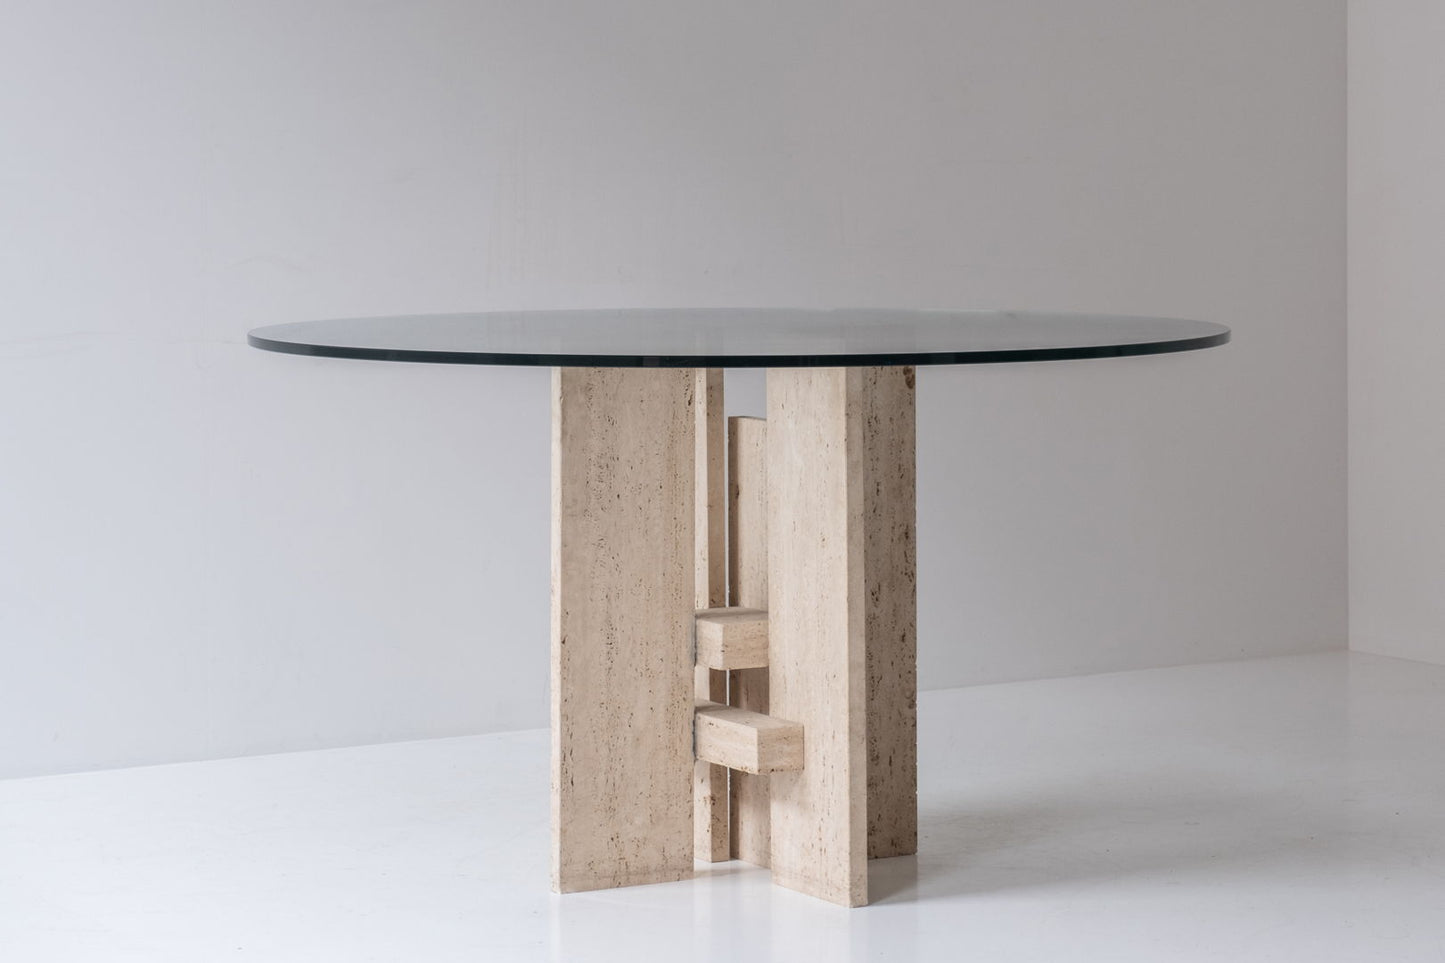 Travertine table with sculptural base designed and manufactured in the 1970s.